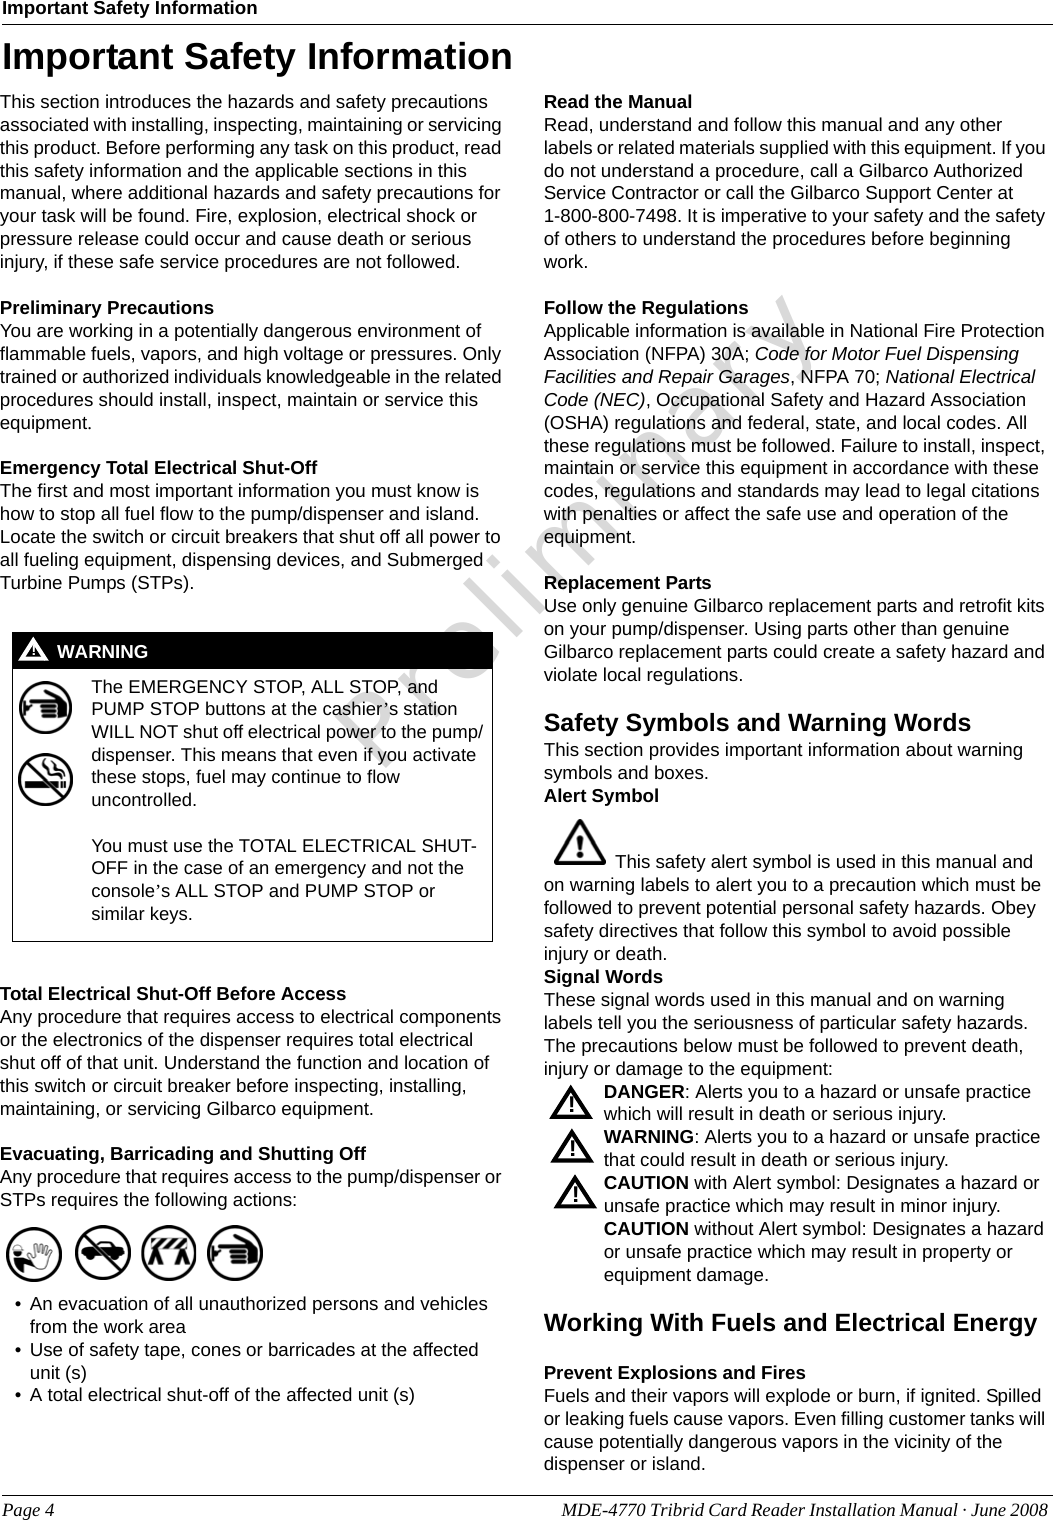 PreliminaryImportant Safety InformationPage 4 MDE-4770 Tribrid Card Reader Installation Manual · June 2008 Important Safety InformationThis section introduces the hazards and safety precautions associated with installing, inspecting, maintaining or servicing this product. Before performing any task on this product, read this safety information and the applicable sections in this manual, where additional hazards and safety precautions for your task will be found. Fire, explosion, electrical shock or pressure release could occur and cause death or serious injury, if these safe service procedures are not followed. Preliminary PrecautionsYou are working in a potentially dangerous environment of flammable fuels, vapors, and high voltage or pressures. Only trained or authorized individuals knowledgeable in the related procedures should install, inspect, maintain or service this equipment.Emergency Total Electrical Shut-OffThe first and most important information you must know is how to stop all fuel flow to the pump/dispenser and island. Locate the switch or circuit breakers that shut off all power to all fueling equipment, dispensing devices, and Submerged Turbine Pumps (STPs).  Total Electrical Shut-Off Before AccessAny procedure that requires access to electrical components or the electronics of the dispenser requires total electrical shut off of that unit. Understand the function and location of this switch or circuit breaker before inspecting, installing, maintaining, or servicing Gilbarco equipment.Evacuating, Barricading and Shutting OffAny procedure that requires access to the pump/dispenser or STPs requires the following actions:• An evacuation of all unauthorized persons and vehicles from the work area • Use of safety tape, cones or barricades at the affected unit (s)• A total electrical shut-off of the affected unit (s)Read the ManualRead, understand and follow this manual and any other labels or related materials supplied with this equipment. If you do not understand a procedure, call a Gilbarco Authorized Service Contractor or call the Gilbarco Support Center at      1-800-800-7498. It is imperative to your safety and the safety of others to understand the procedures before beginning work.Follow the RegulationsApplicable information is available in National Fire Protection Association (NFPA) 30A; Code for Motor Fuel Dispensing Facilities and Repair Garages, NFPA 70; National Electrical Code (NEC), Occupational Safety and Hazard Association (OSHA) regulations and federal, state, and local codes. All these regulations must be followed. Failure to install, inspect, maintain or service this equipment in accordance with these codes, regulations and standards may lead to legal citations with penalties or affect the safe use and operation of the equipment.Replacement PartsUse only genuine Gilbarco replacement parts and retrofit kits on your pump/dispenser. Using parts other than genuine Gilbarco replacement parts could create a safety hazard and violate local regulations.Safety Symbols and Warning WordsThis section provides important information about warning symbols and boxes.Alert Symbol  This safety alert symbol is used in this manual and on warning labels to alert you to a precaution which must be followed to prevent potential personal safety hazards. Obey safety directives that follow this symbol to avoid possible injury or death.Signal WordsThese signal words used in this manual and on warning labels tell you the seriousness of particular safety hazards. The precautions below must be followed to prevent death, injury or damage to the equipment:DANGER: Alerts you to a hazard or unsafe practice which will result in death or serious injury.WARNING: Alerts you to a hazard or unsafe practice that could result in death or serious injury. CAUTION with Alert symbol: Designates a hazard or unsafe practice which may result in minor injury.CAUTION without Alert symbol: Designates a hazard or unsafe practice which may result in property or equipment damage.Working With Fuels and Electrical EnergyPrevent Explosions and FiresFuels and their vapors will explode or burn, if ignited. Spilled or leaking fuels cause vapors. Even filling customer tanks will cause potentially dangerous vapors in the vicinity of the dispenser or island.The EMERGENCY STOP, ALL STOP, and PUMP STOP buttons at the cashier’s station WILL NOT shut off electrical power to the pump/dispenser. This means that even if you activate these stops, fuel may continue to flow uncontrolled. You must use the TOTAL ELECTRICAL SHUT-OFF in the case of an emergency and not the console’s ALL STOP and PUMP STOP or similar keys.!WARNING!!!!